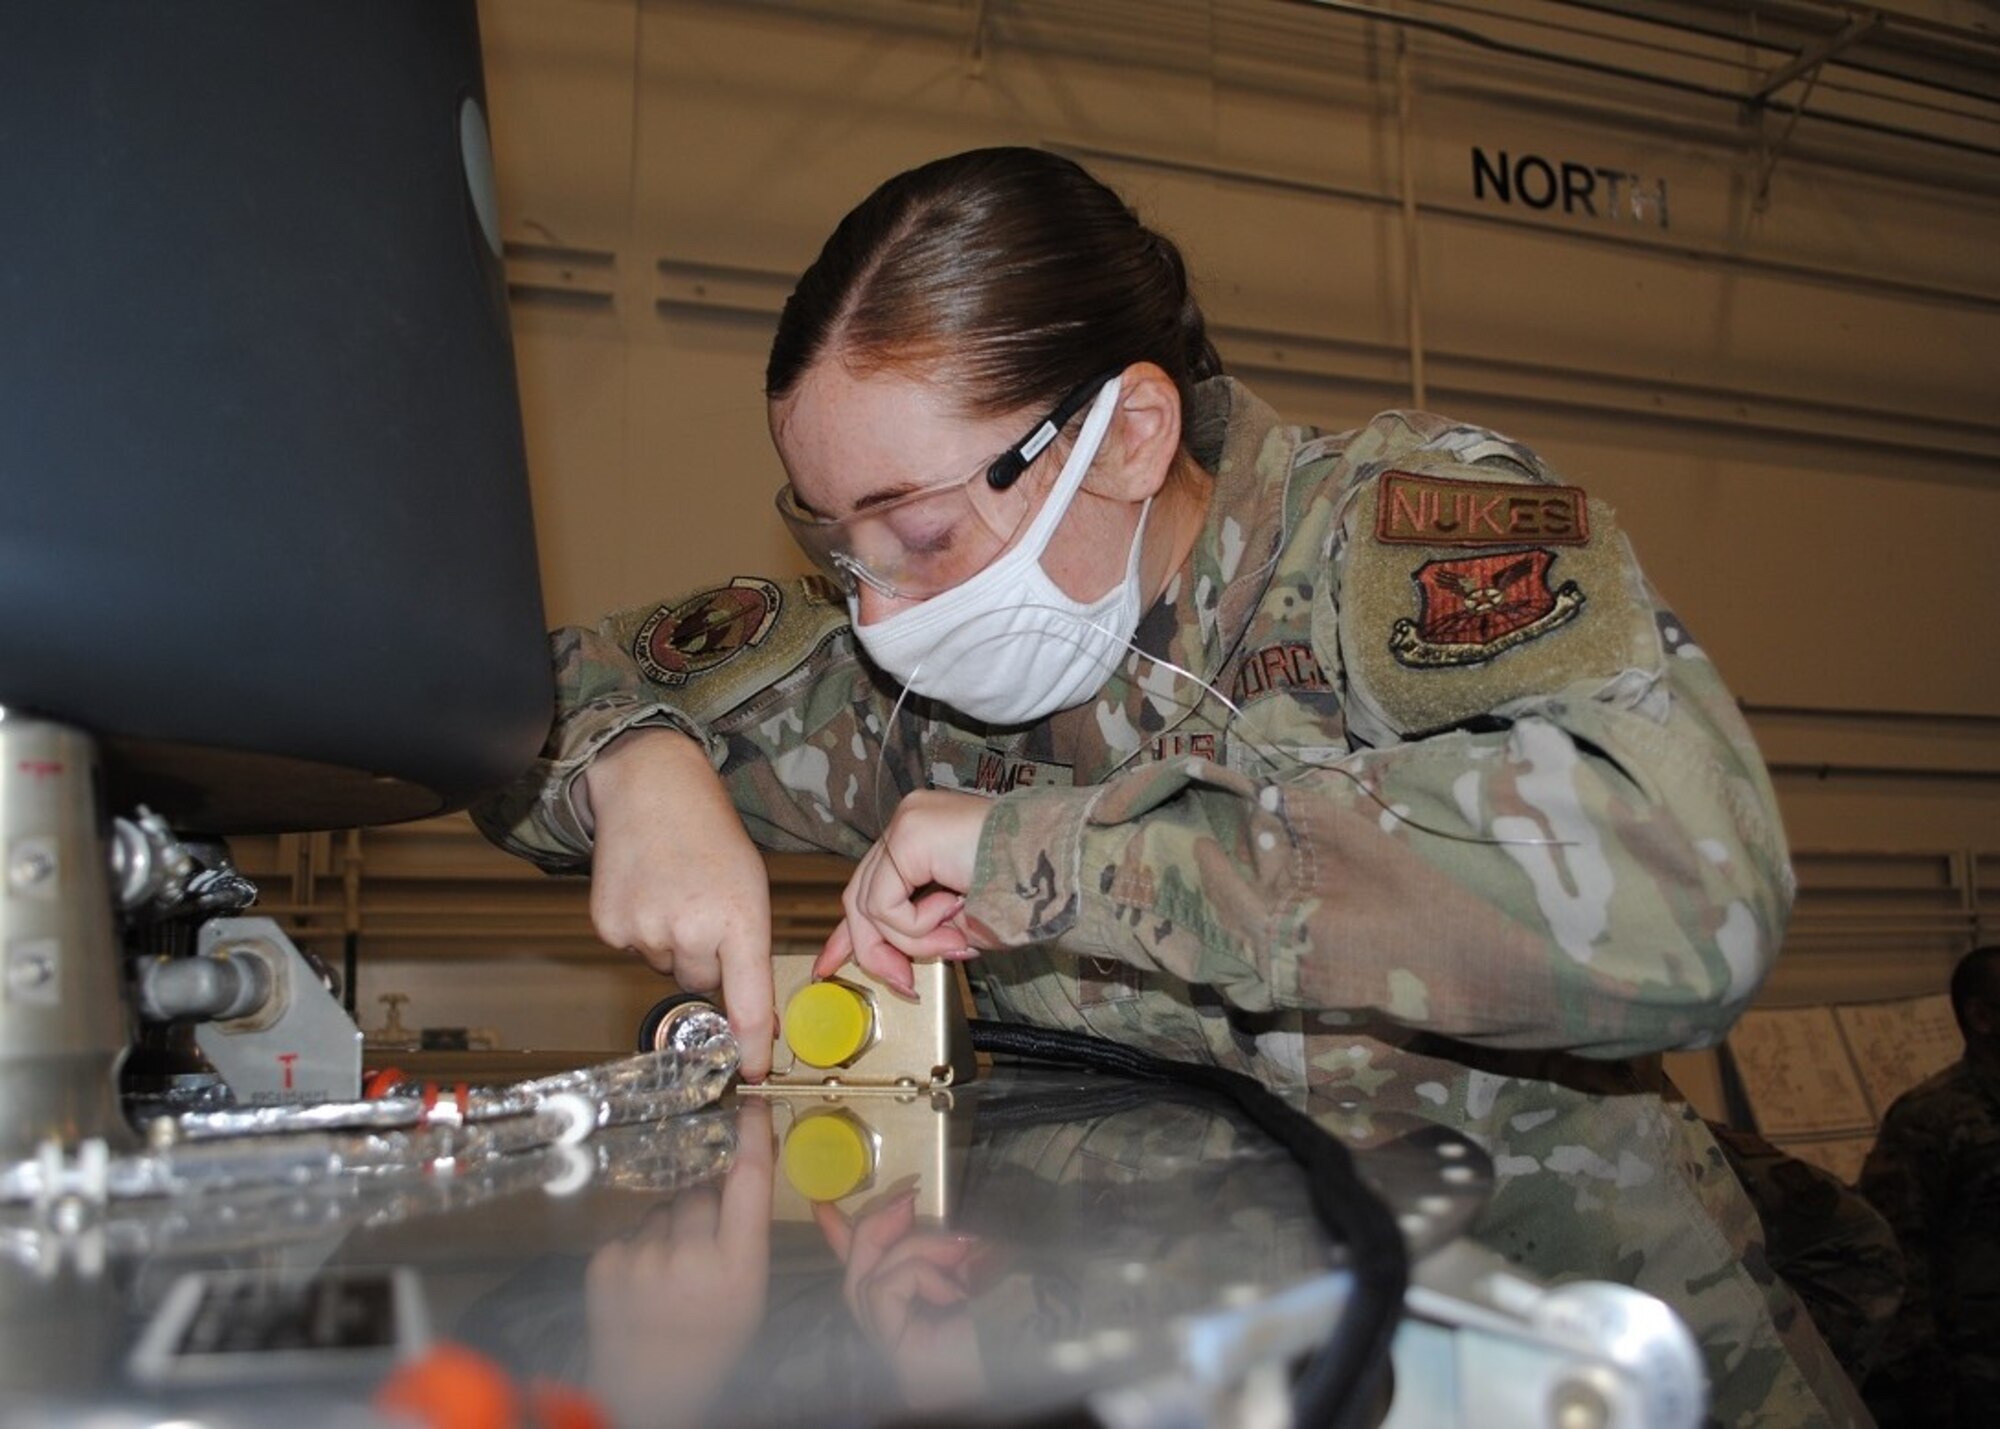 An Air Force NCO works on hardware.